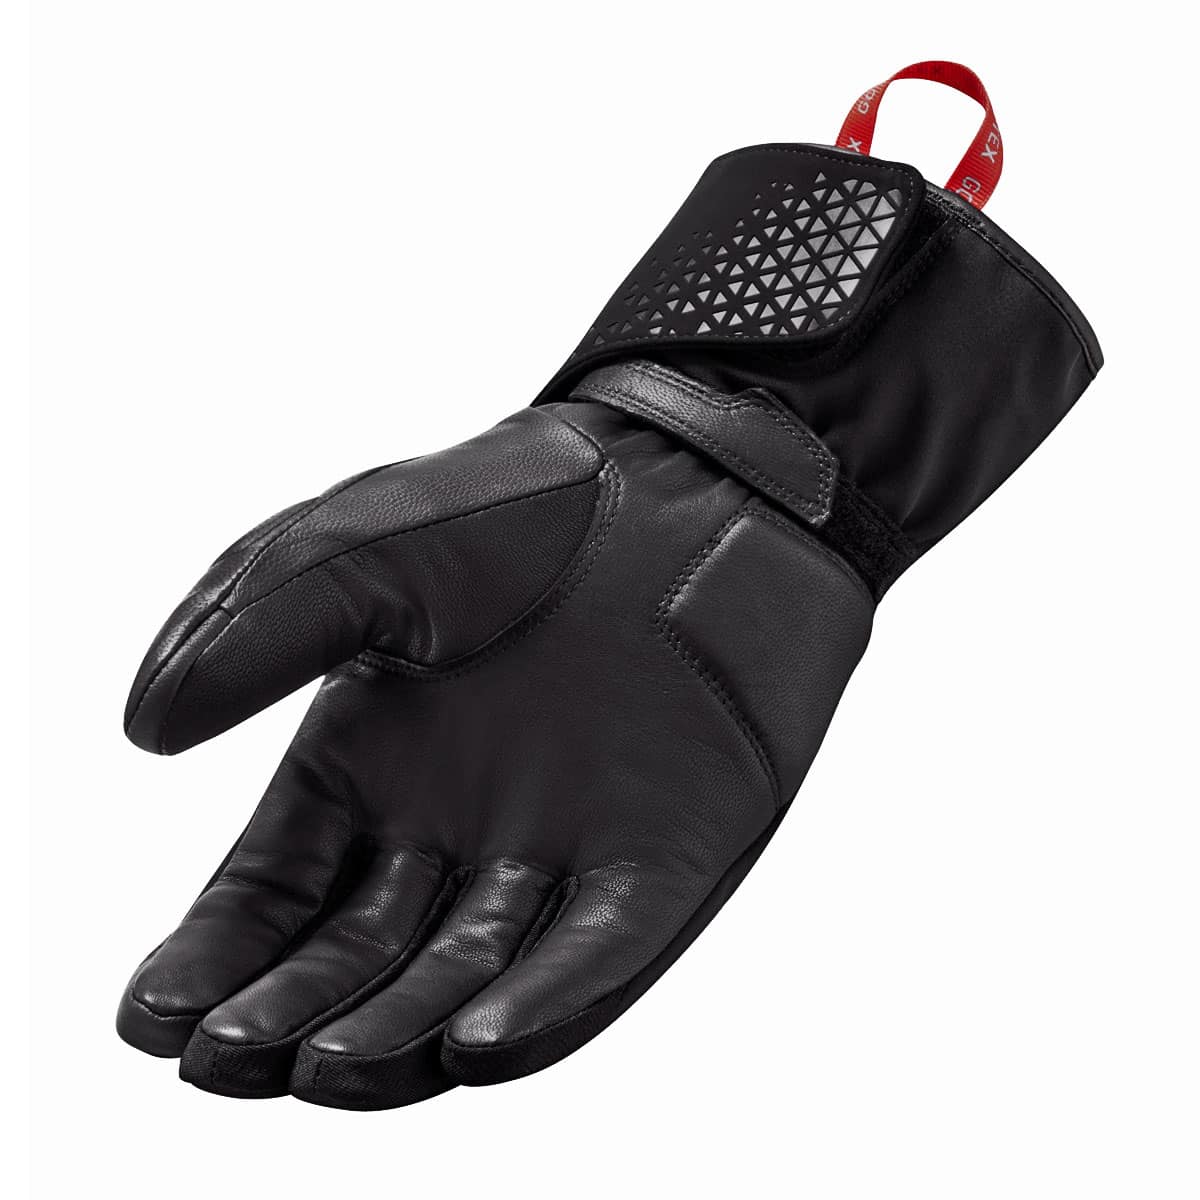 Rev It! Stratos 3 Gore-Tex Gloves: Full drum-dyed leather motorbike gloves for optimal winter protection - Palm